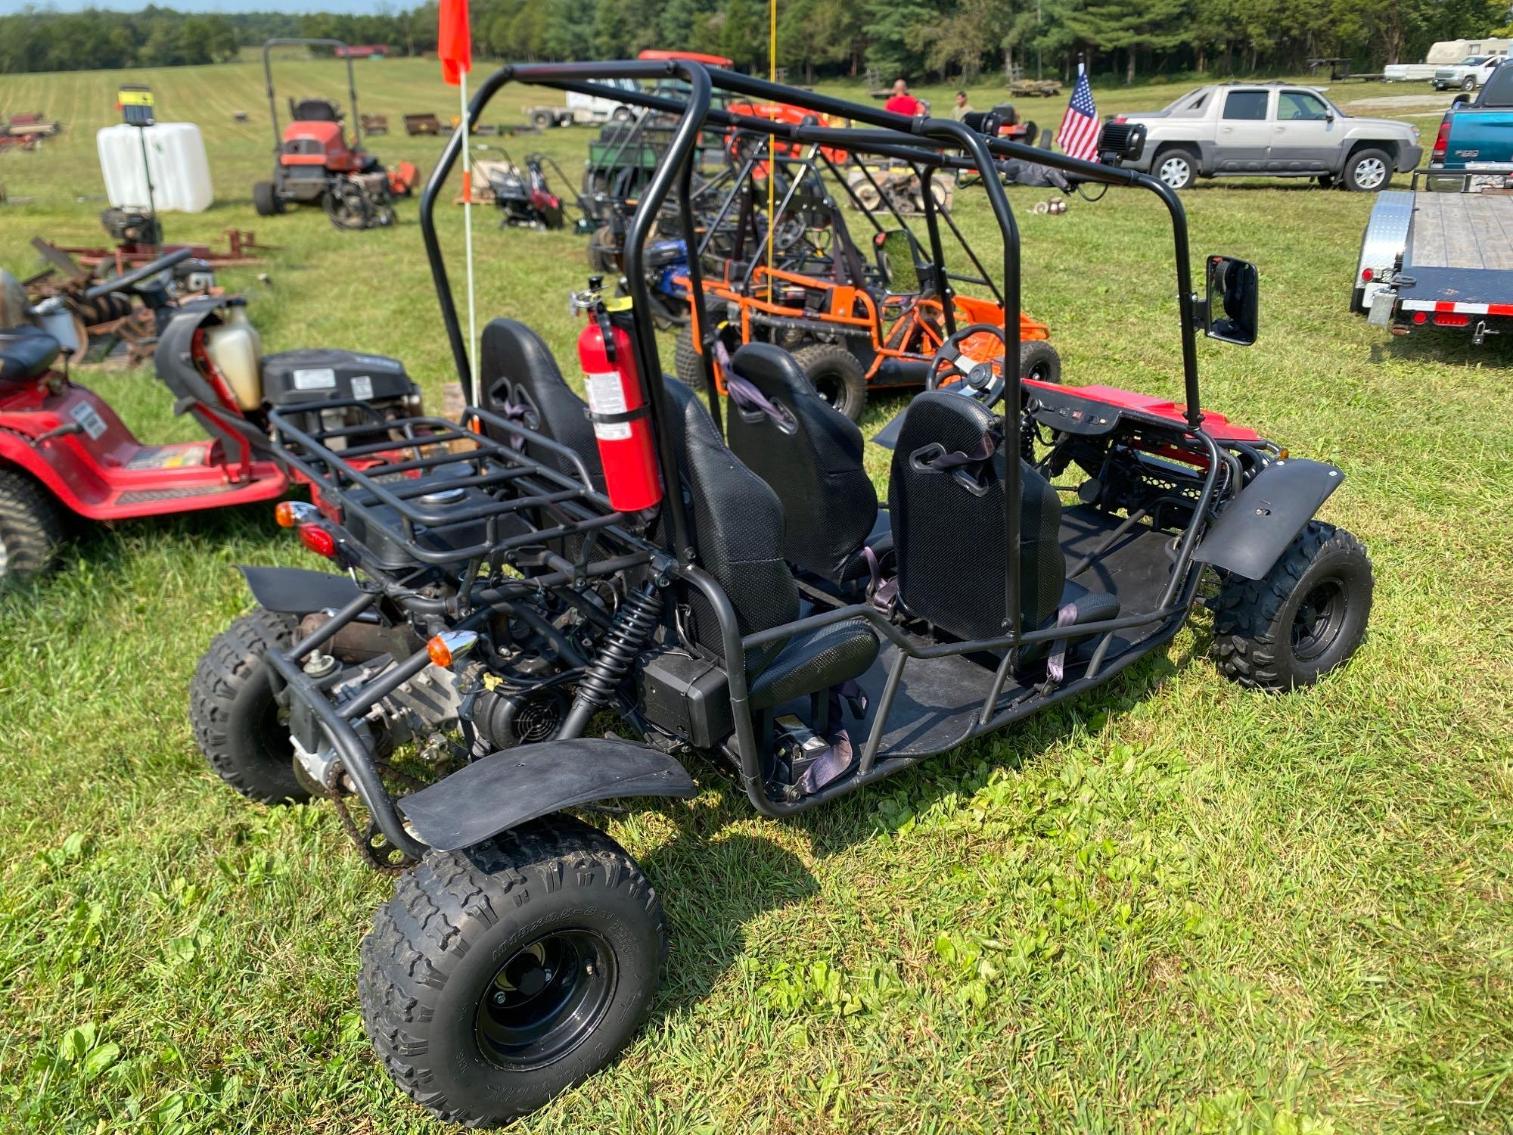 Image for Jeep 4 Seater Go Kart 150CC, Per seller- runs out well